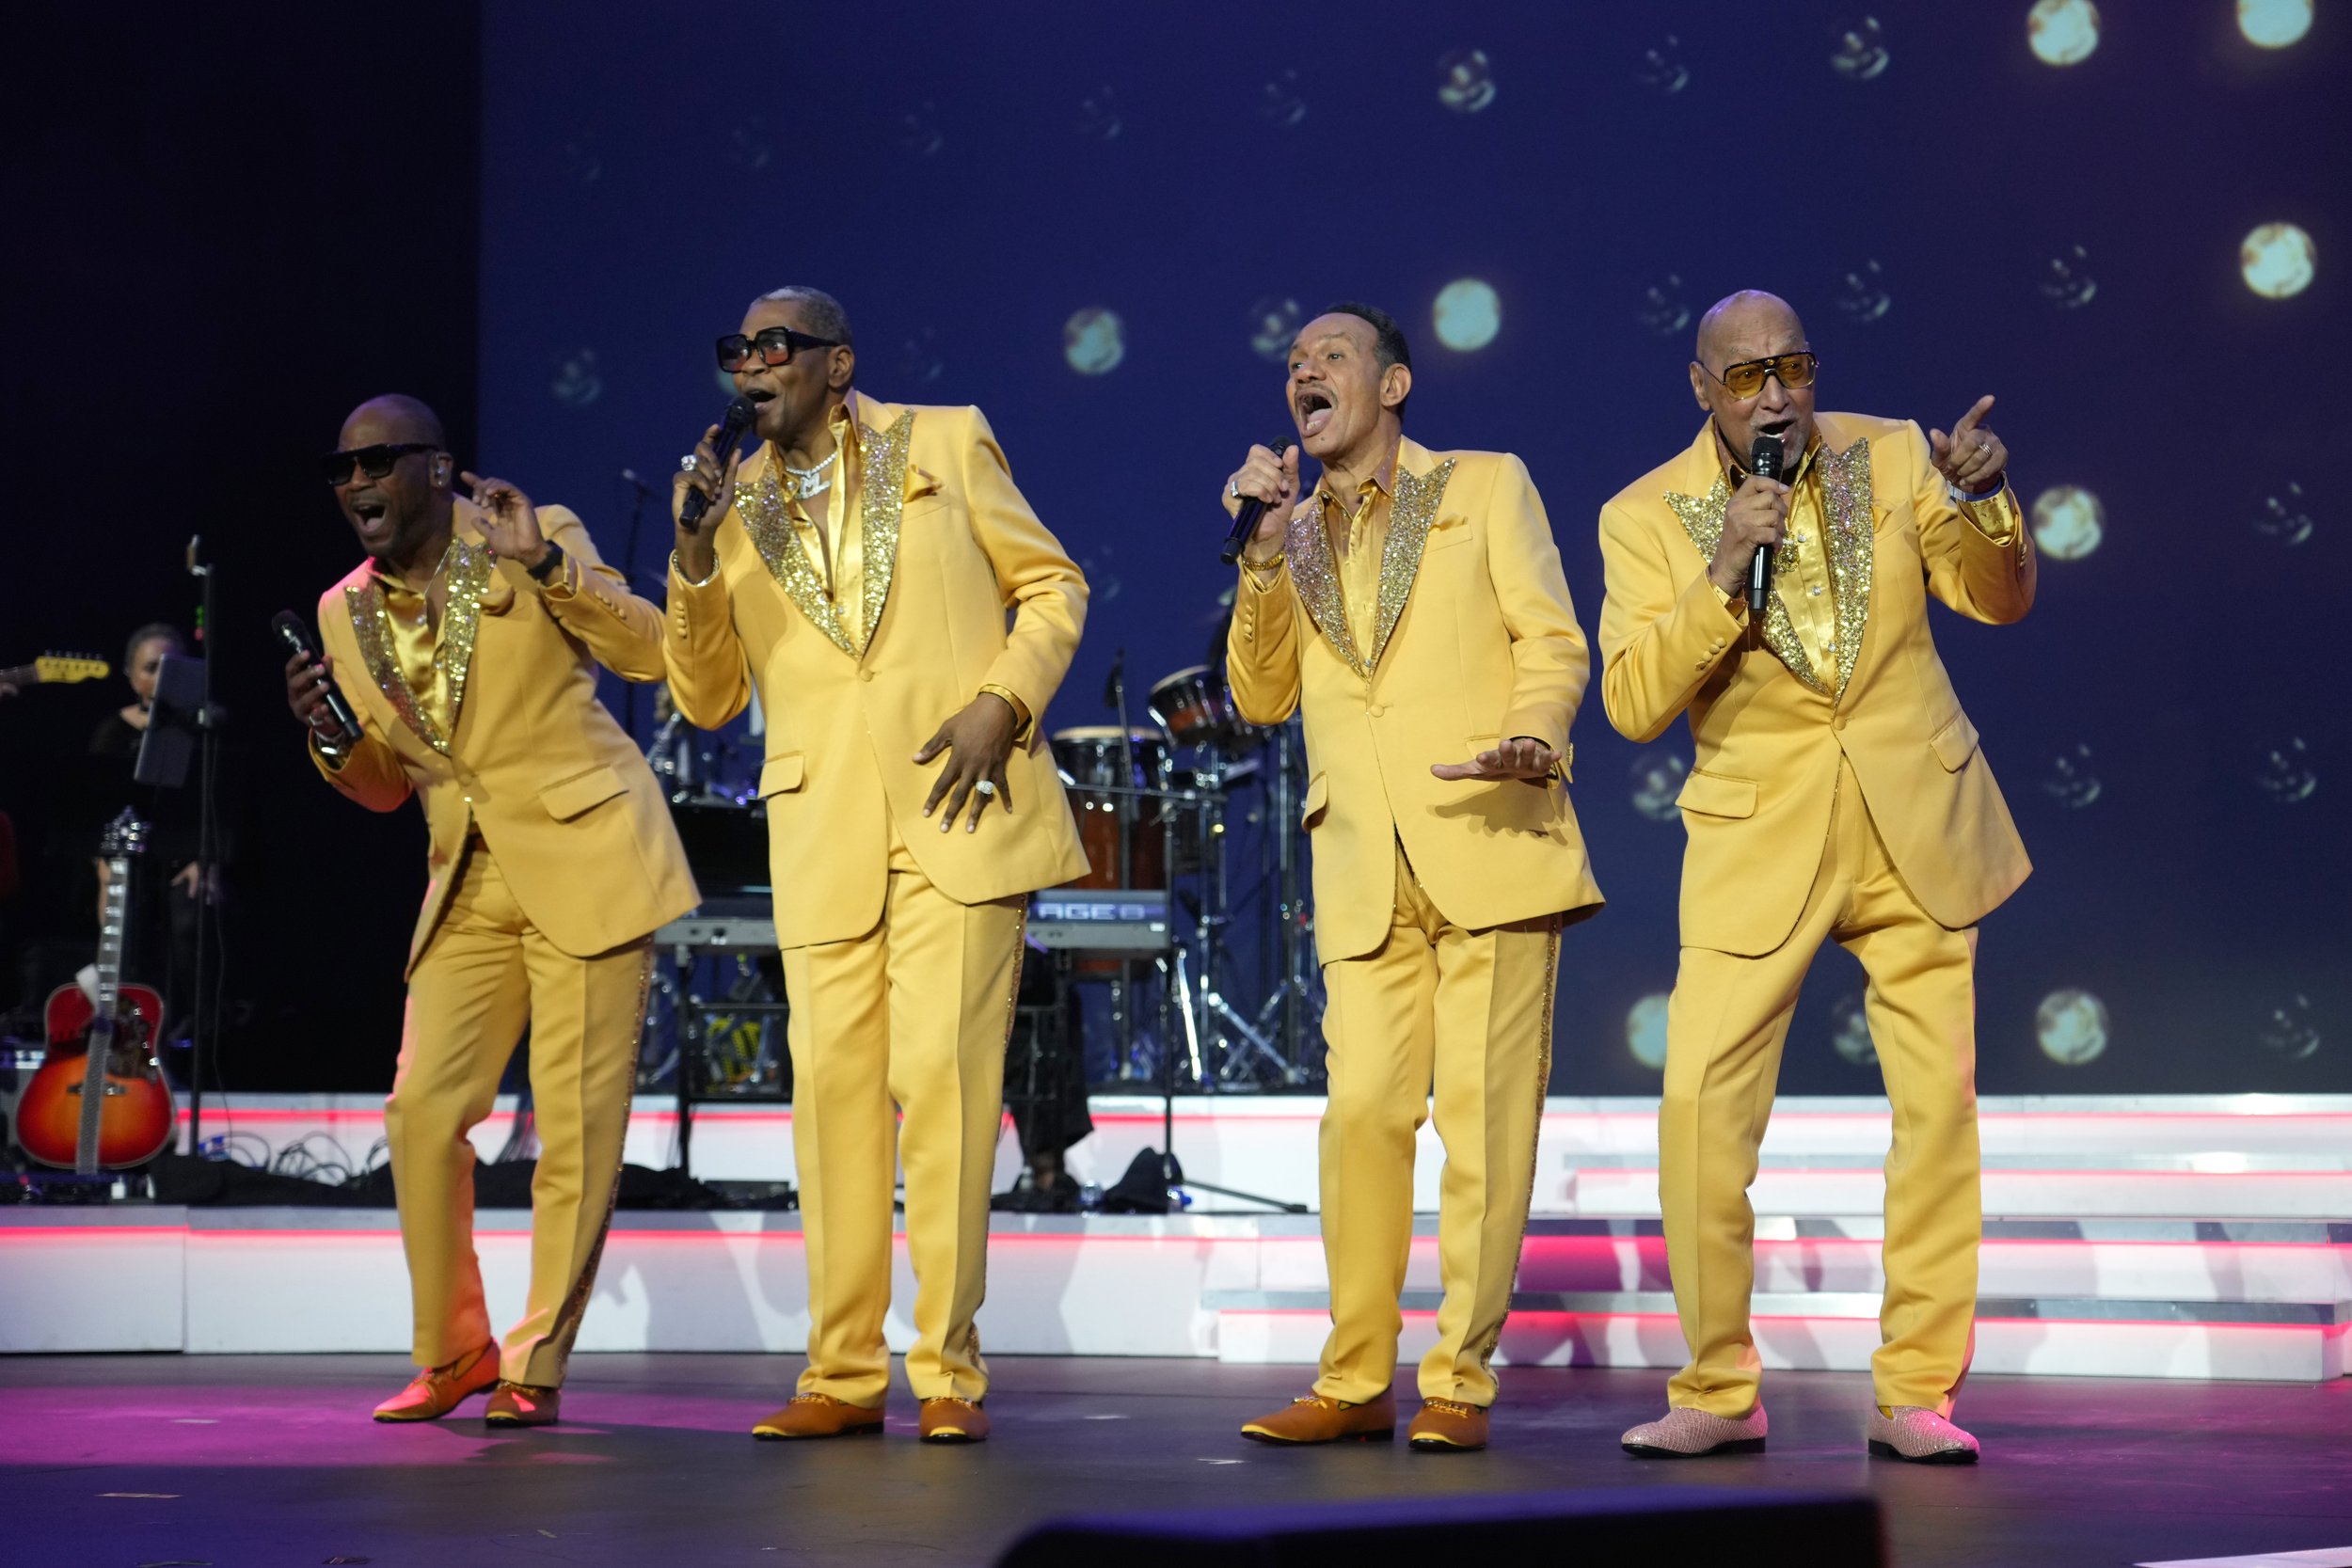  LOS ANGELES, CALIFORNIA - FEBRUARY 03: (L-R) Lawrence Payton, Alex Morris, Ronnie McNeir, and Abdul 'Duke' Fakir of Four Tops perform onstage during MusiCares Persons of the Year Honoring Berry Gordy and Smokey Robinson at Los Angeles Convention Cen